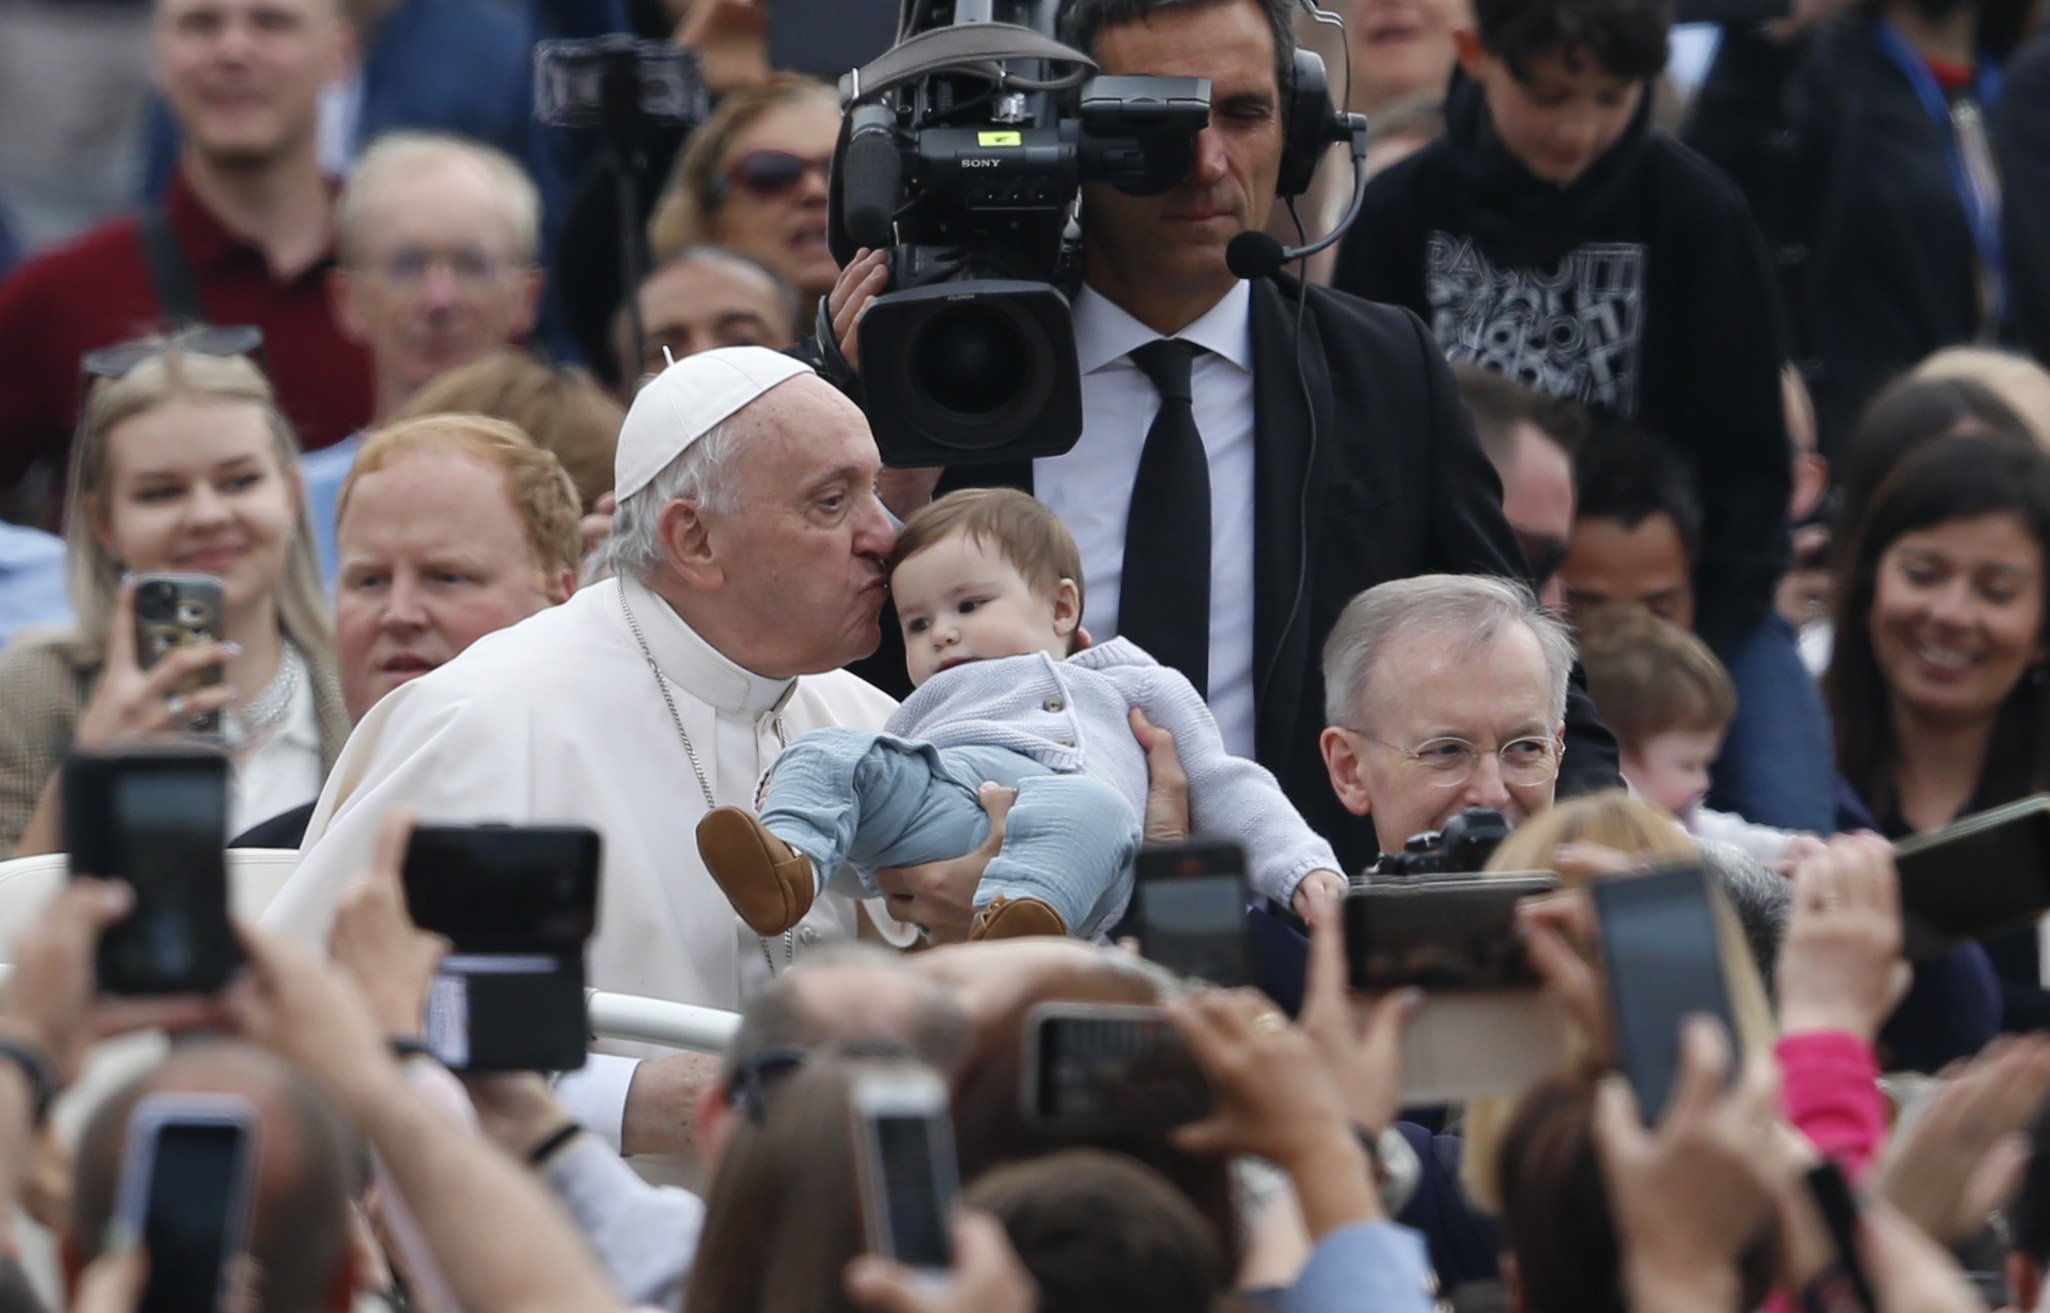 Pope Francis kisses a baby as he greets the crowd during his general audience in St. Peter's Square at the Vatican May 4, 2022. (CNS photo/Paul Haring)